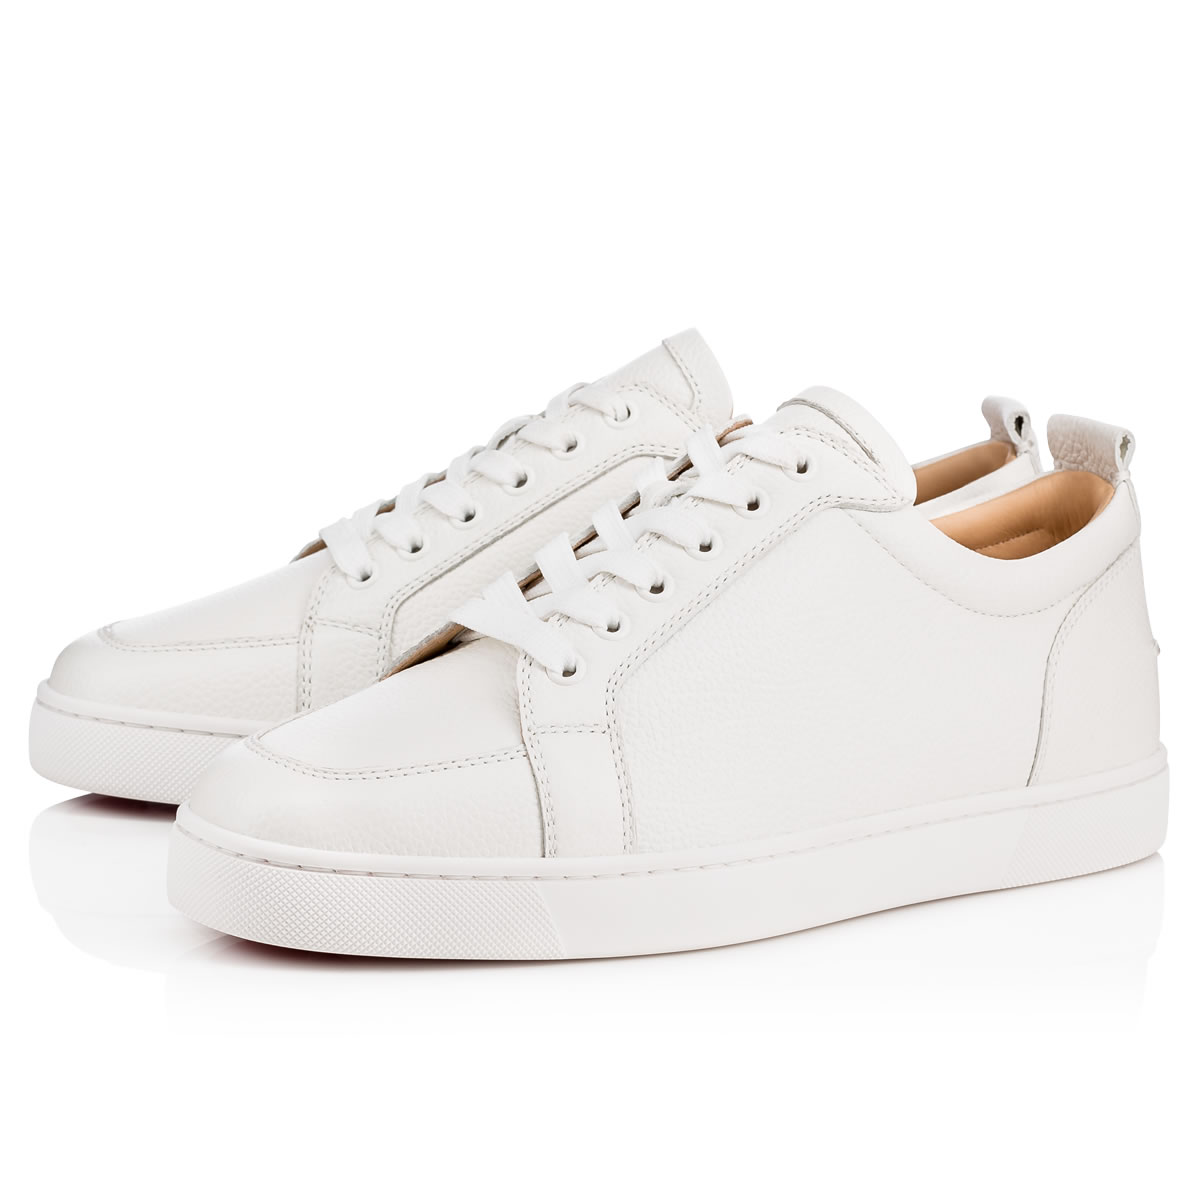 CHRISTIAN LOUBOUTIN Rantulow Rubber-Trimmed Mesh and Suede